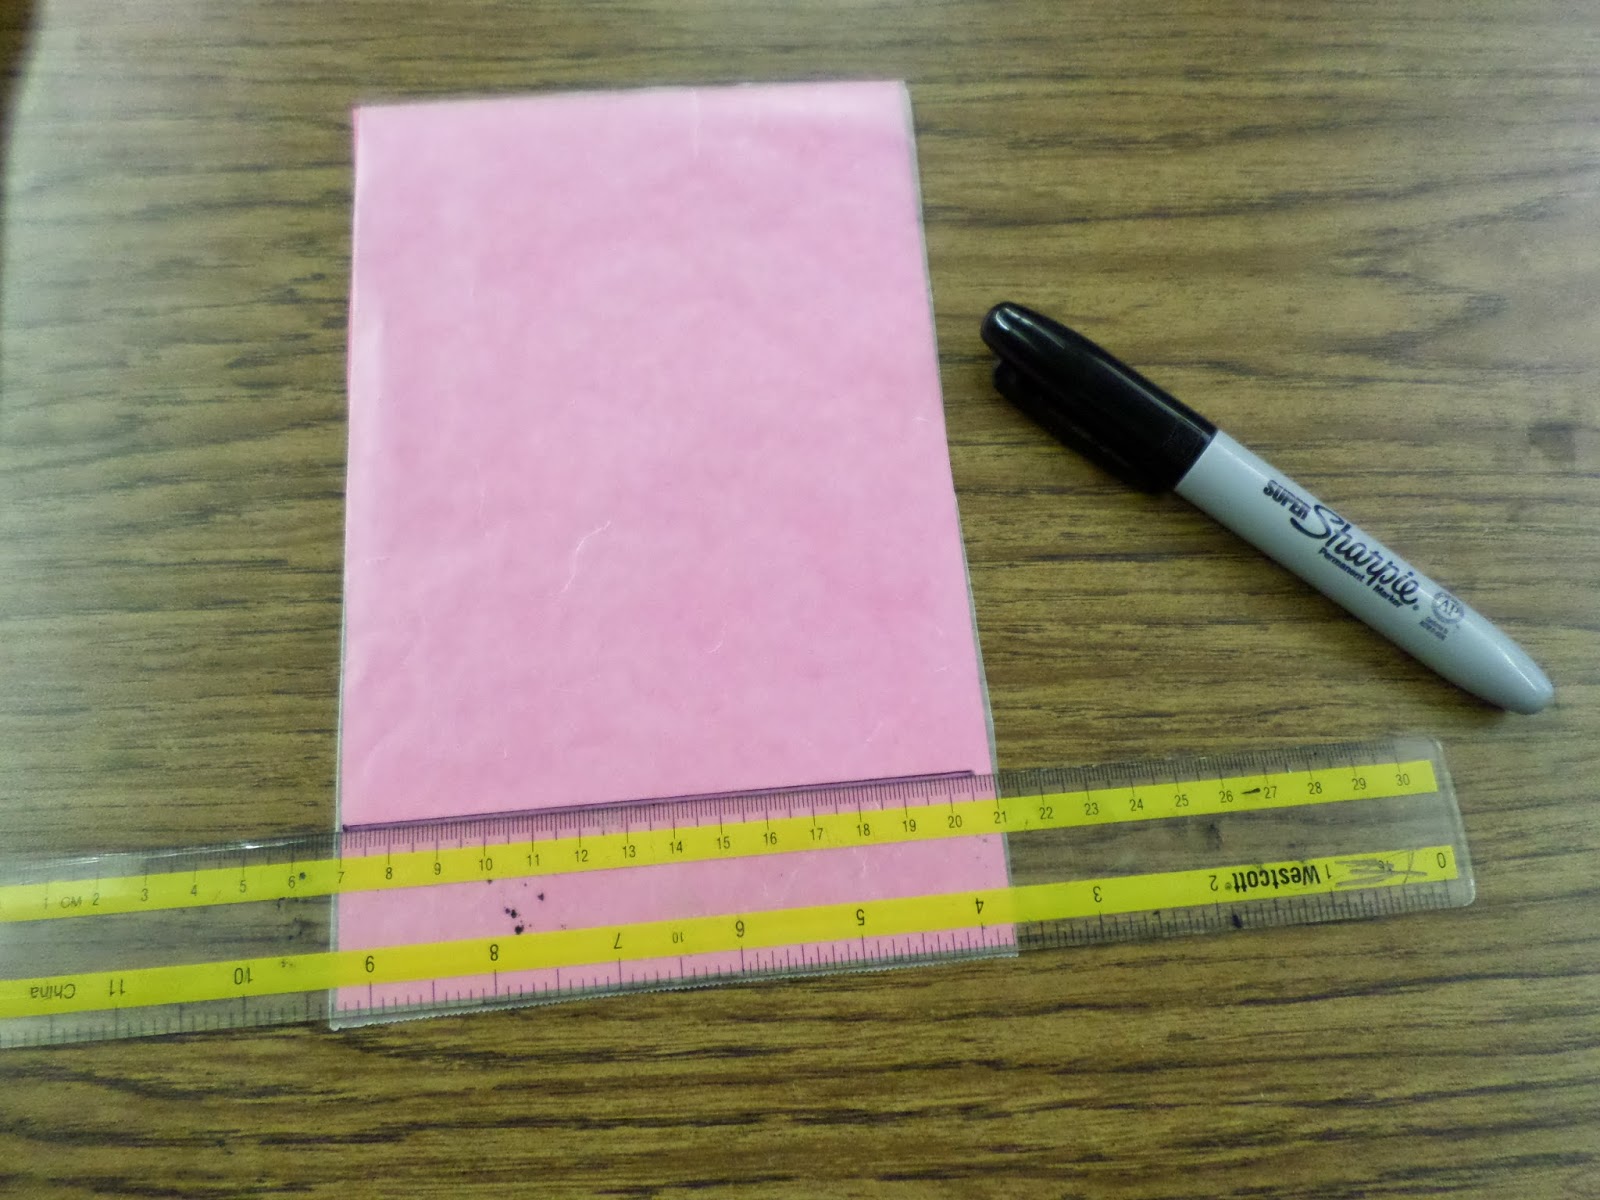 Wax Paper Parabolas - Hands on Activity for Introducing Parabolas in Quadratics or Conics Conic Sections Unit